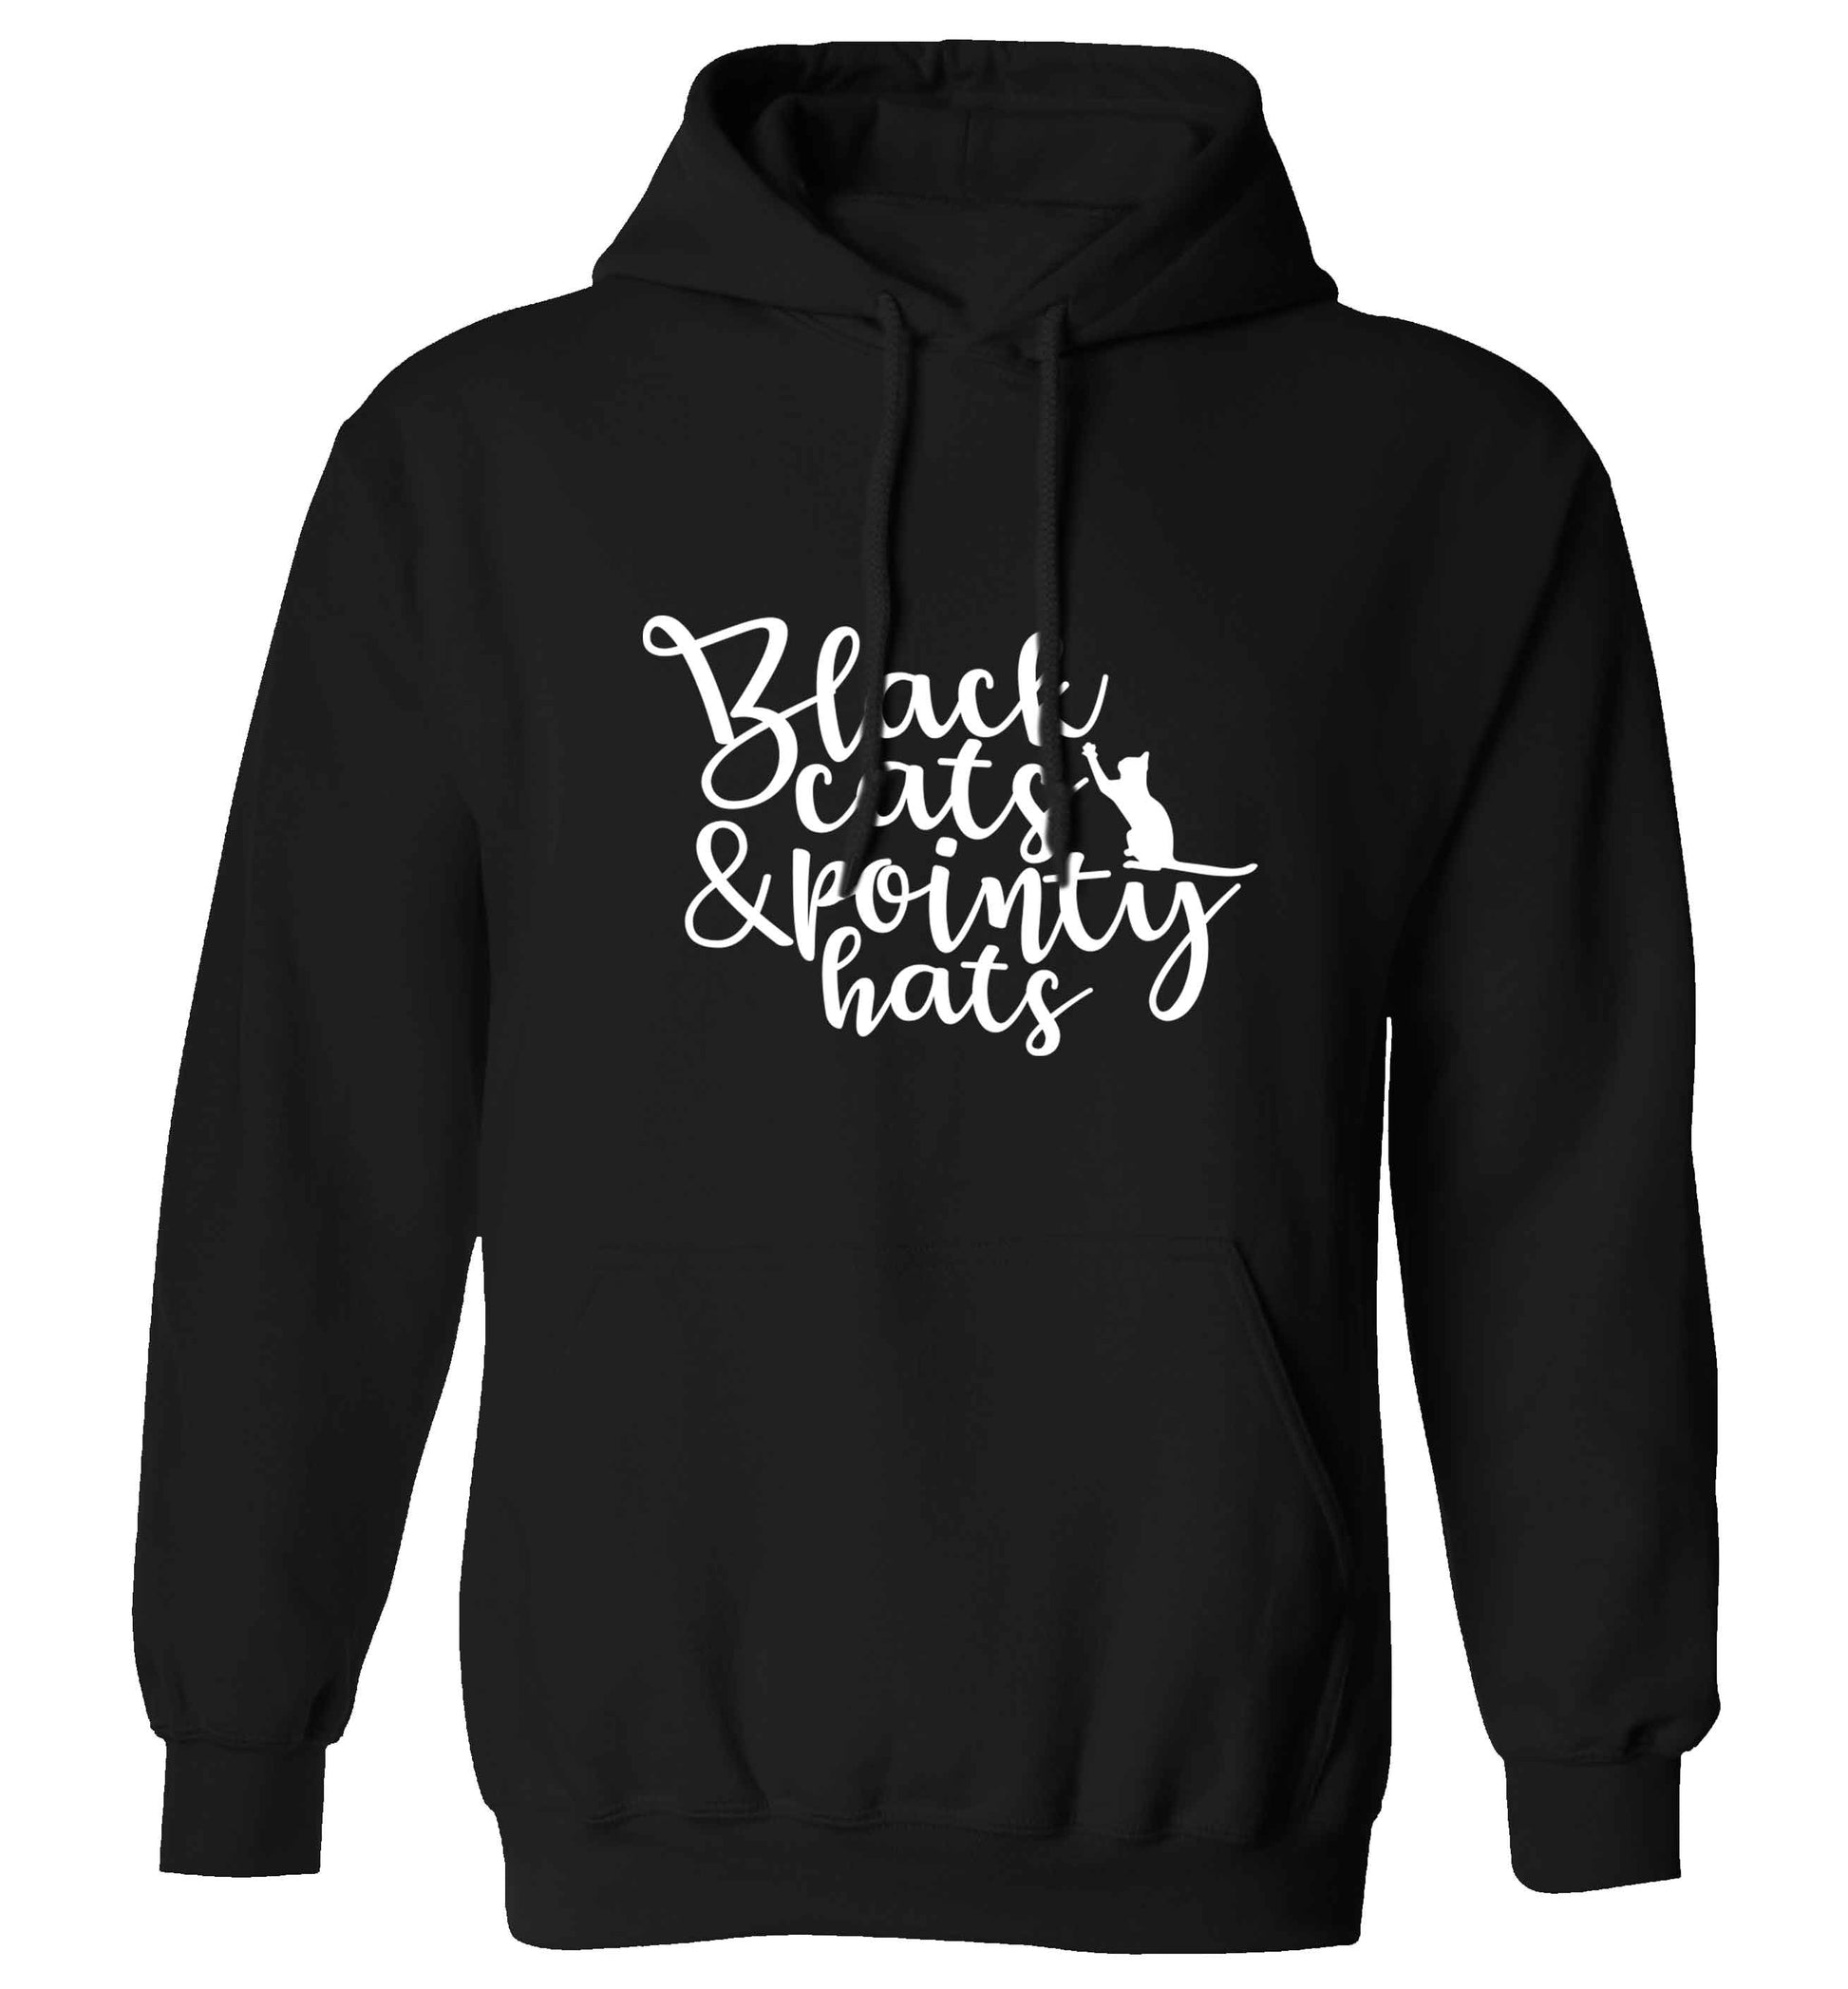 Black cats and pointy hats adults unisex black hoodie 2XL